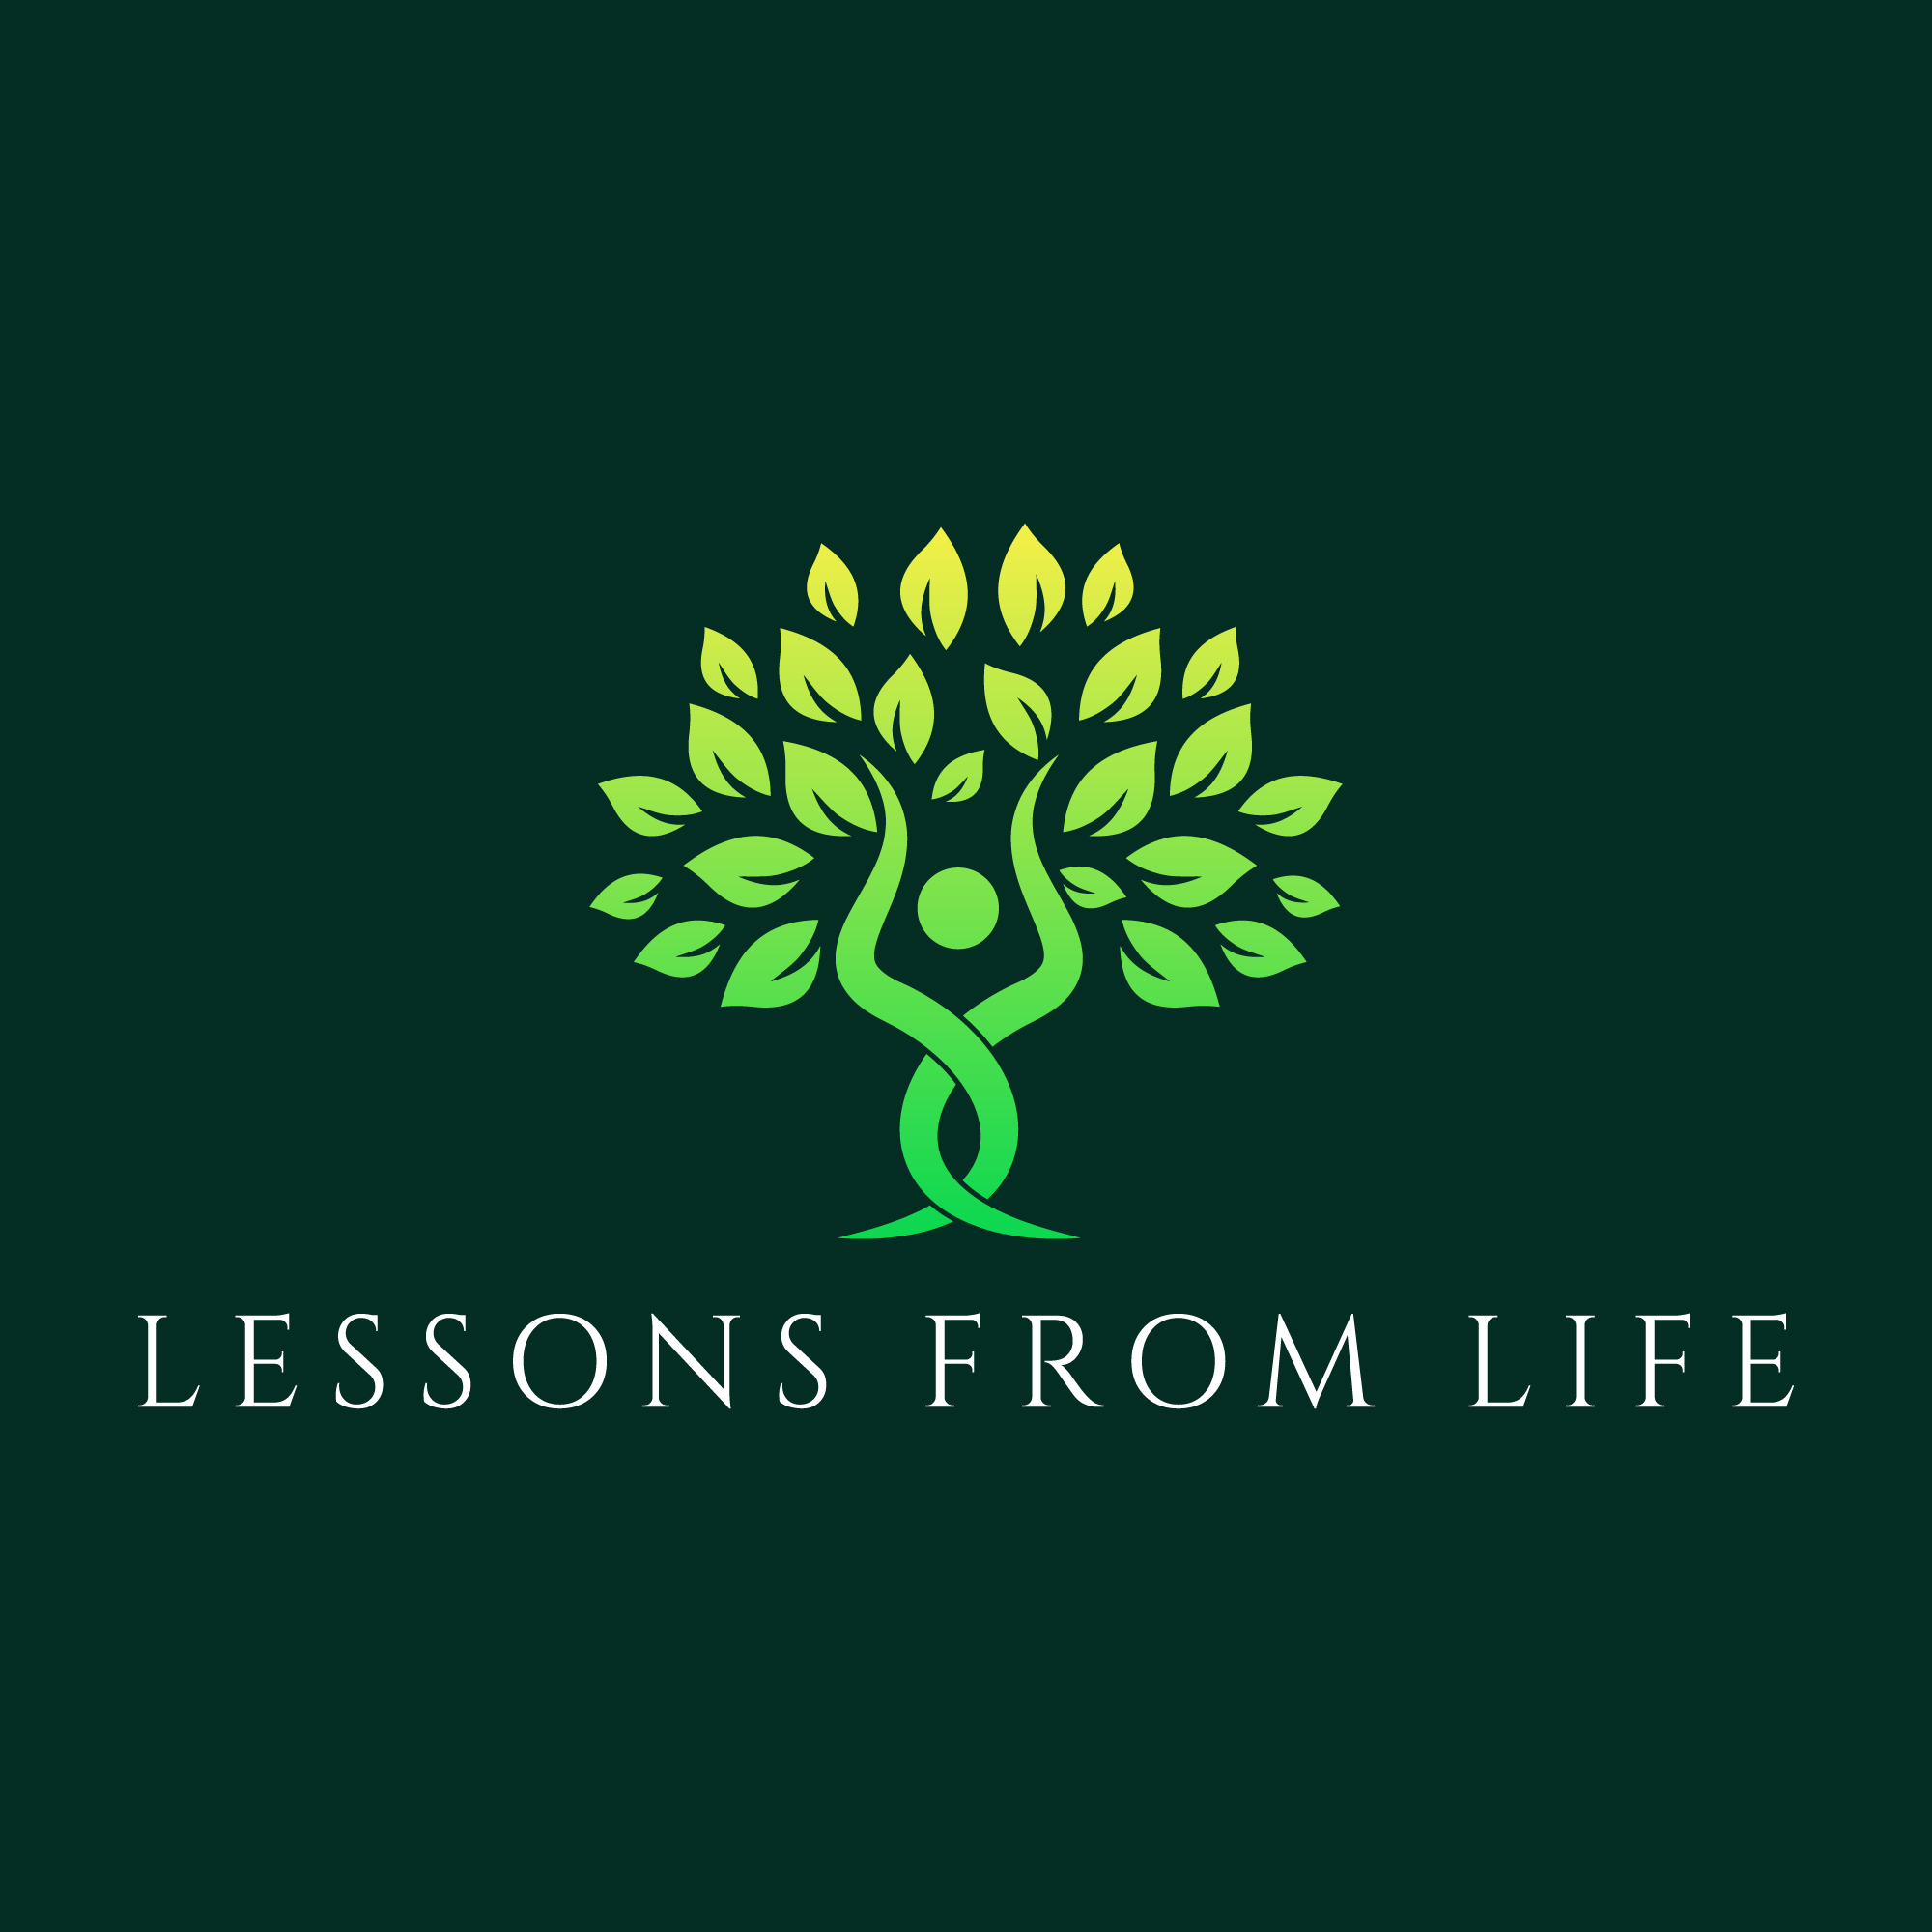 The Lessons from Life Podcast